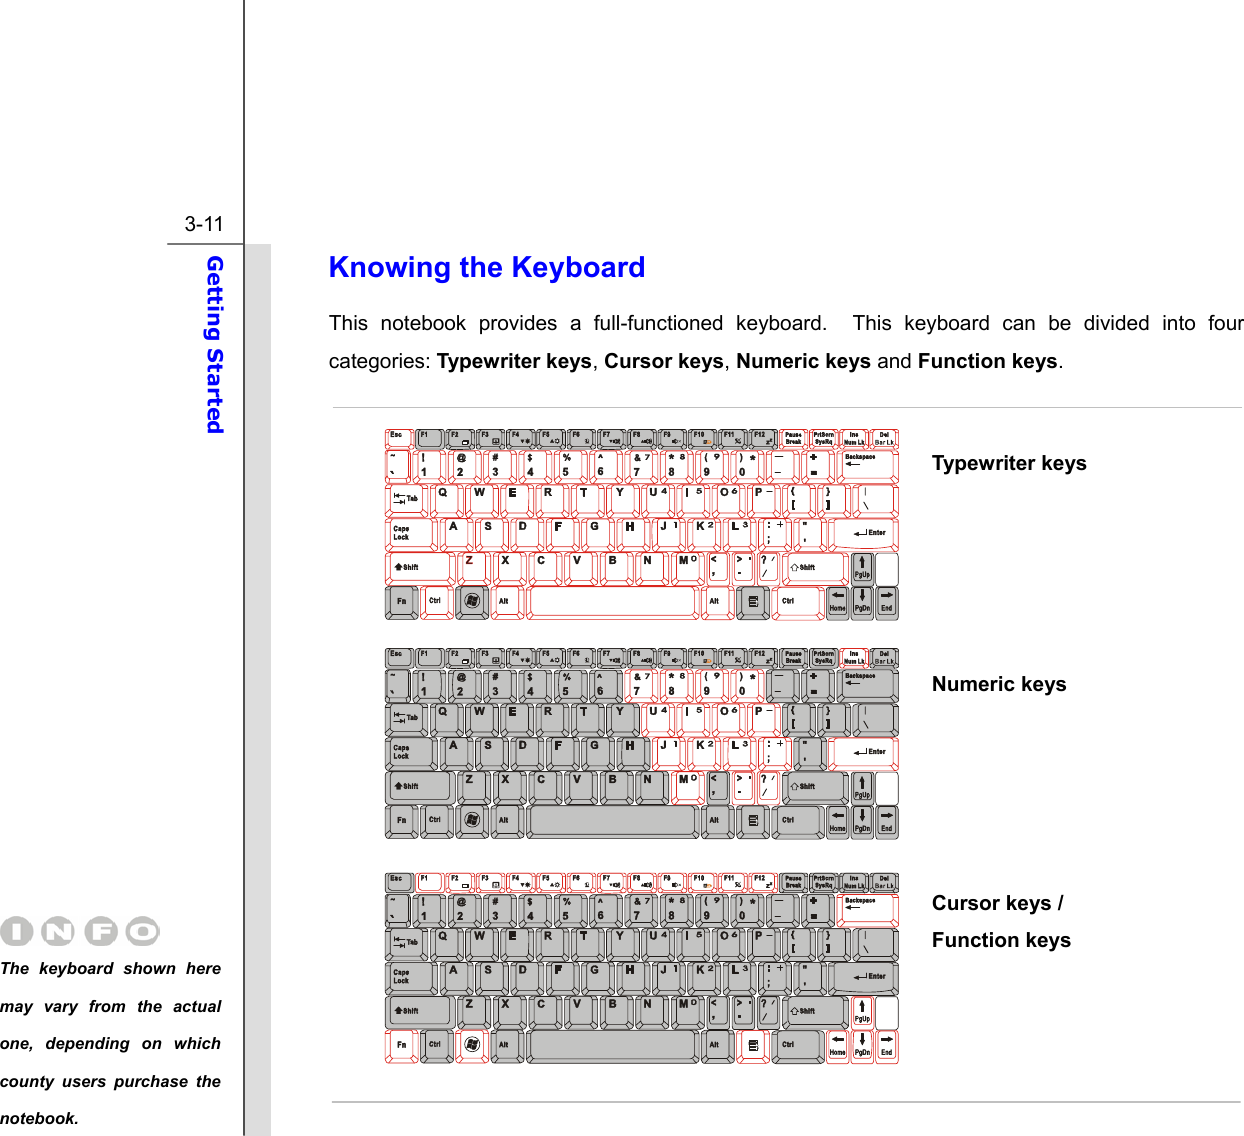  3-11 Getting Started  Knowing the Keyboard This notebook provides a full-functioned keyboard.  This keyboard can be divided into four categories: Typewriter keys, Cursor keys, Numeric keys and Function keys.           The keyboard shown here may vary from the actual one, depending on which county users purchase the notebook. Typewriter keys Numeric keys Cursor keys / Function keys 